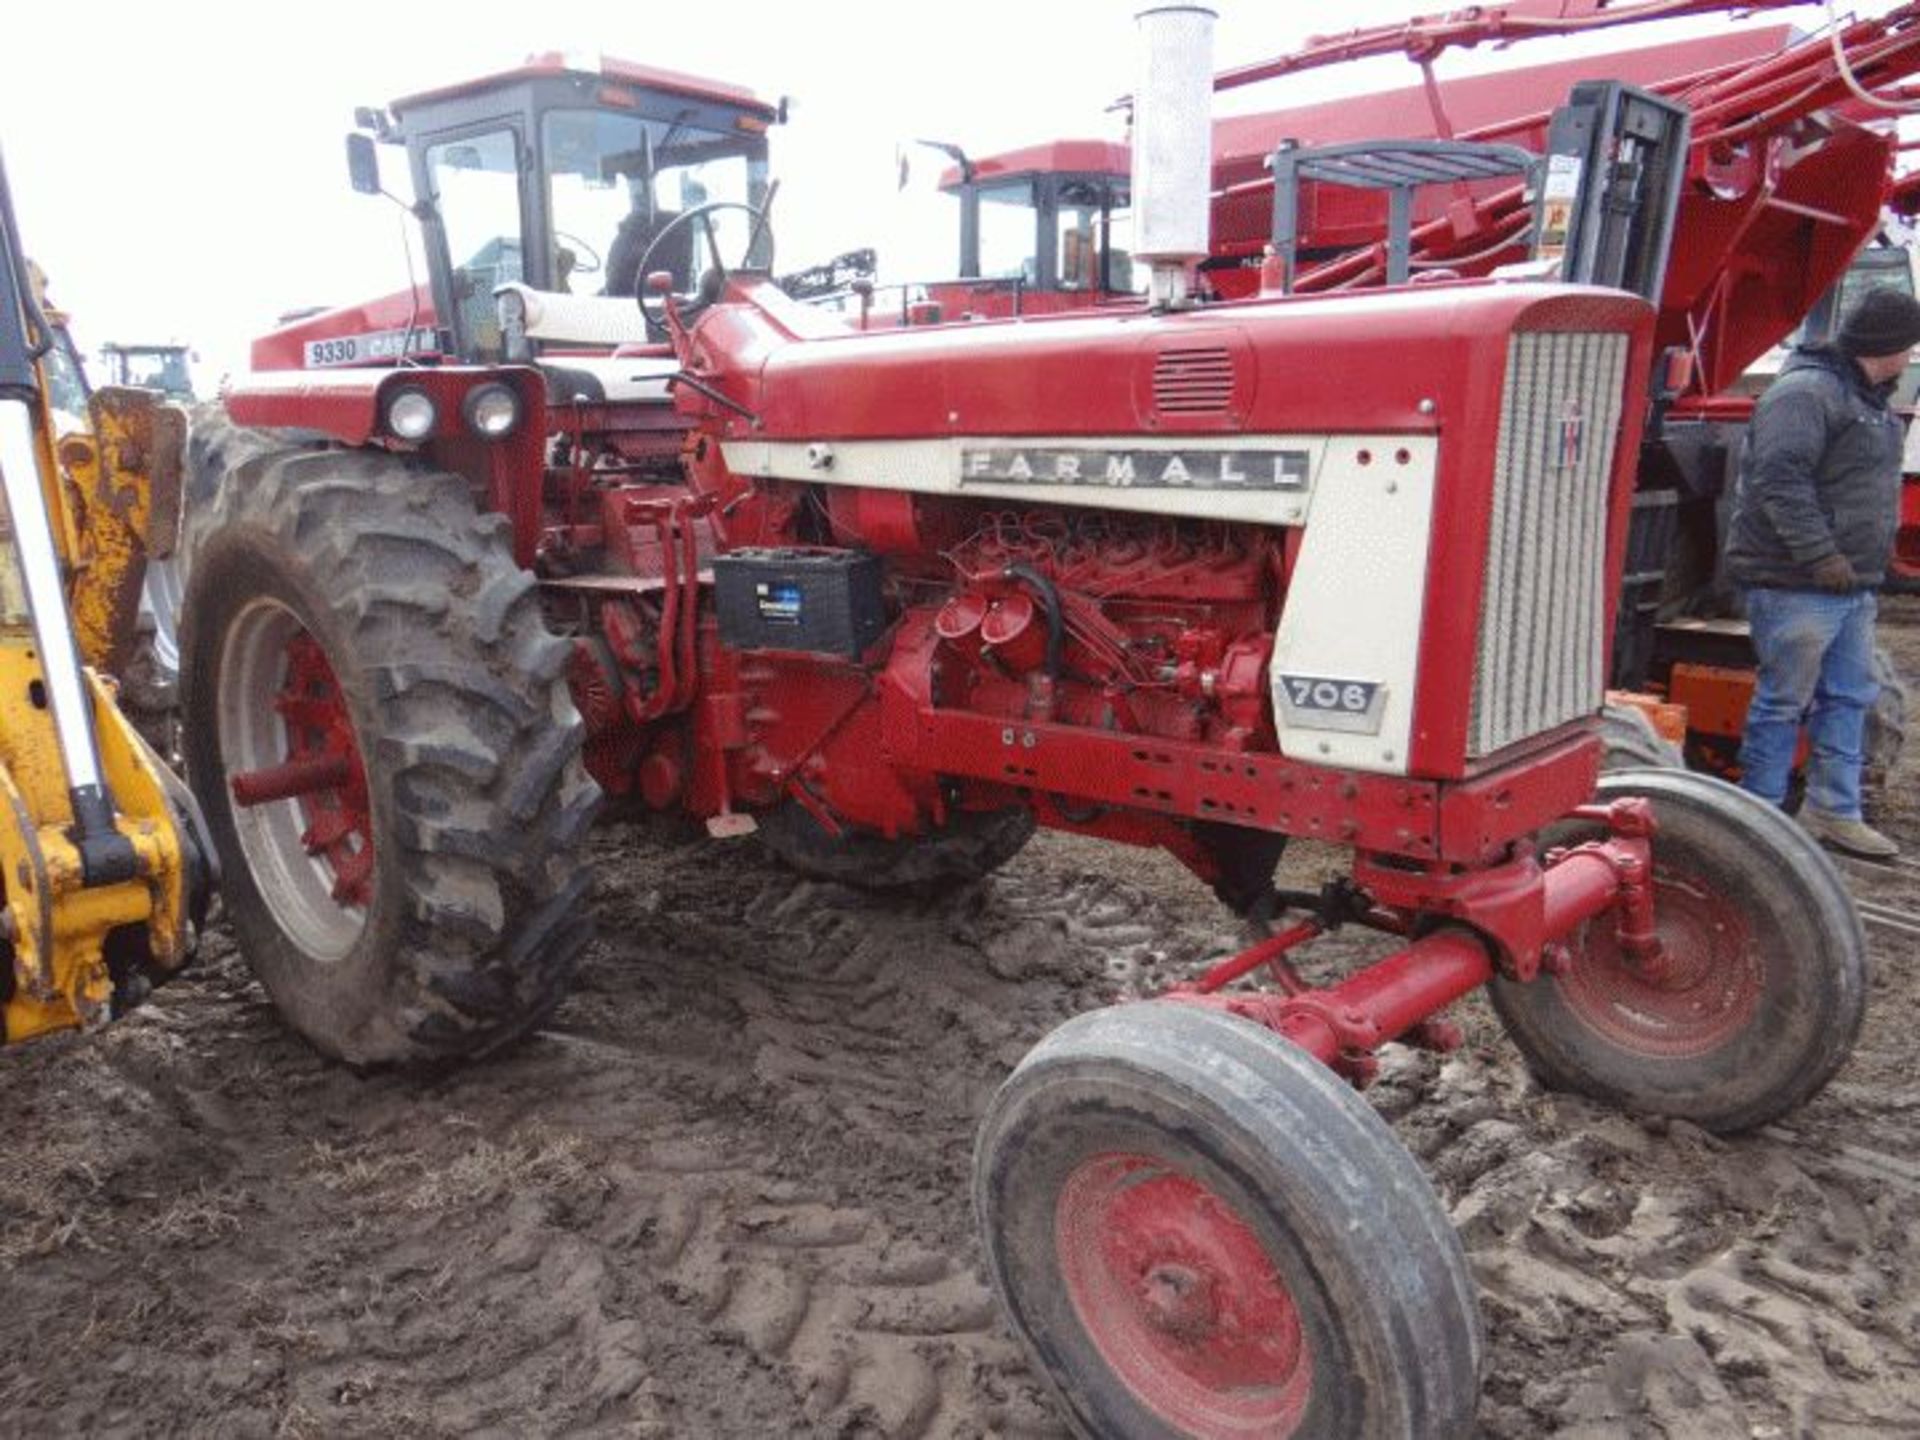 Lot # 2398 Farmall 706 Tractor Diesel, Eng Rebuilt about 10hrs Ago along with Pump, Good TA, New - Image 2 of 4